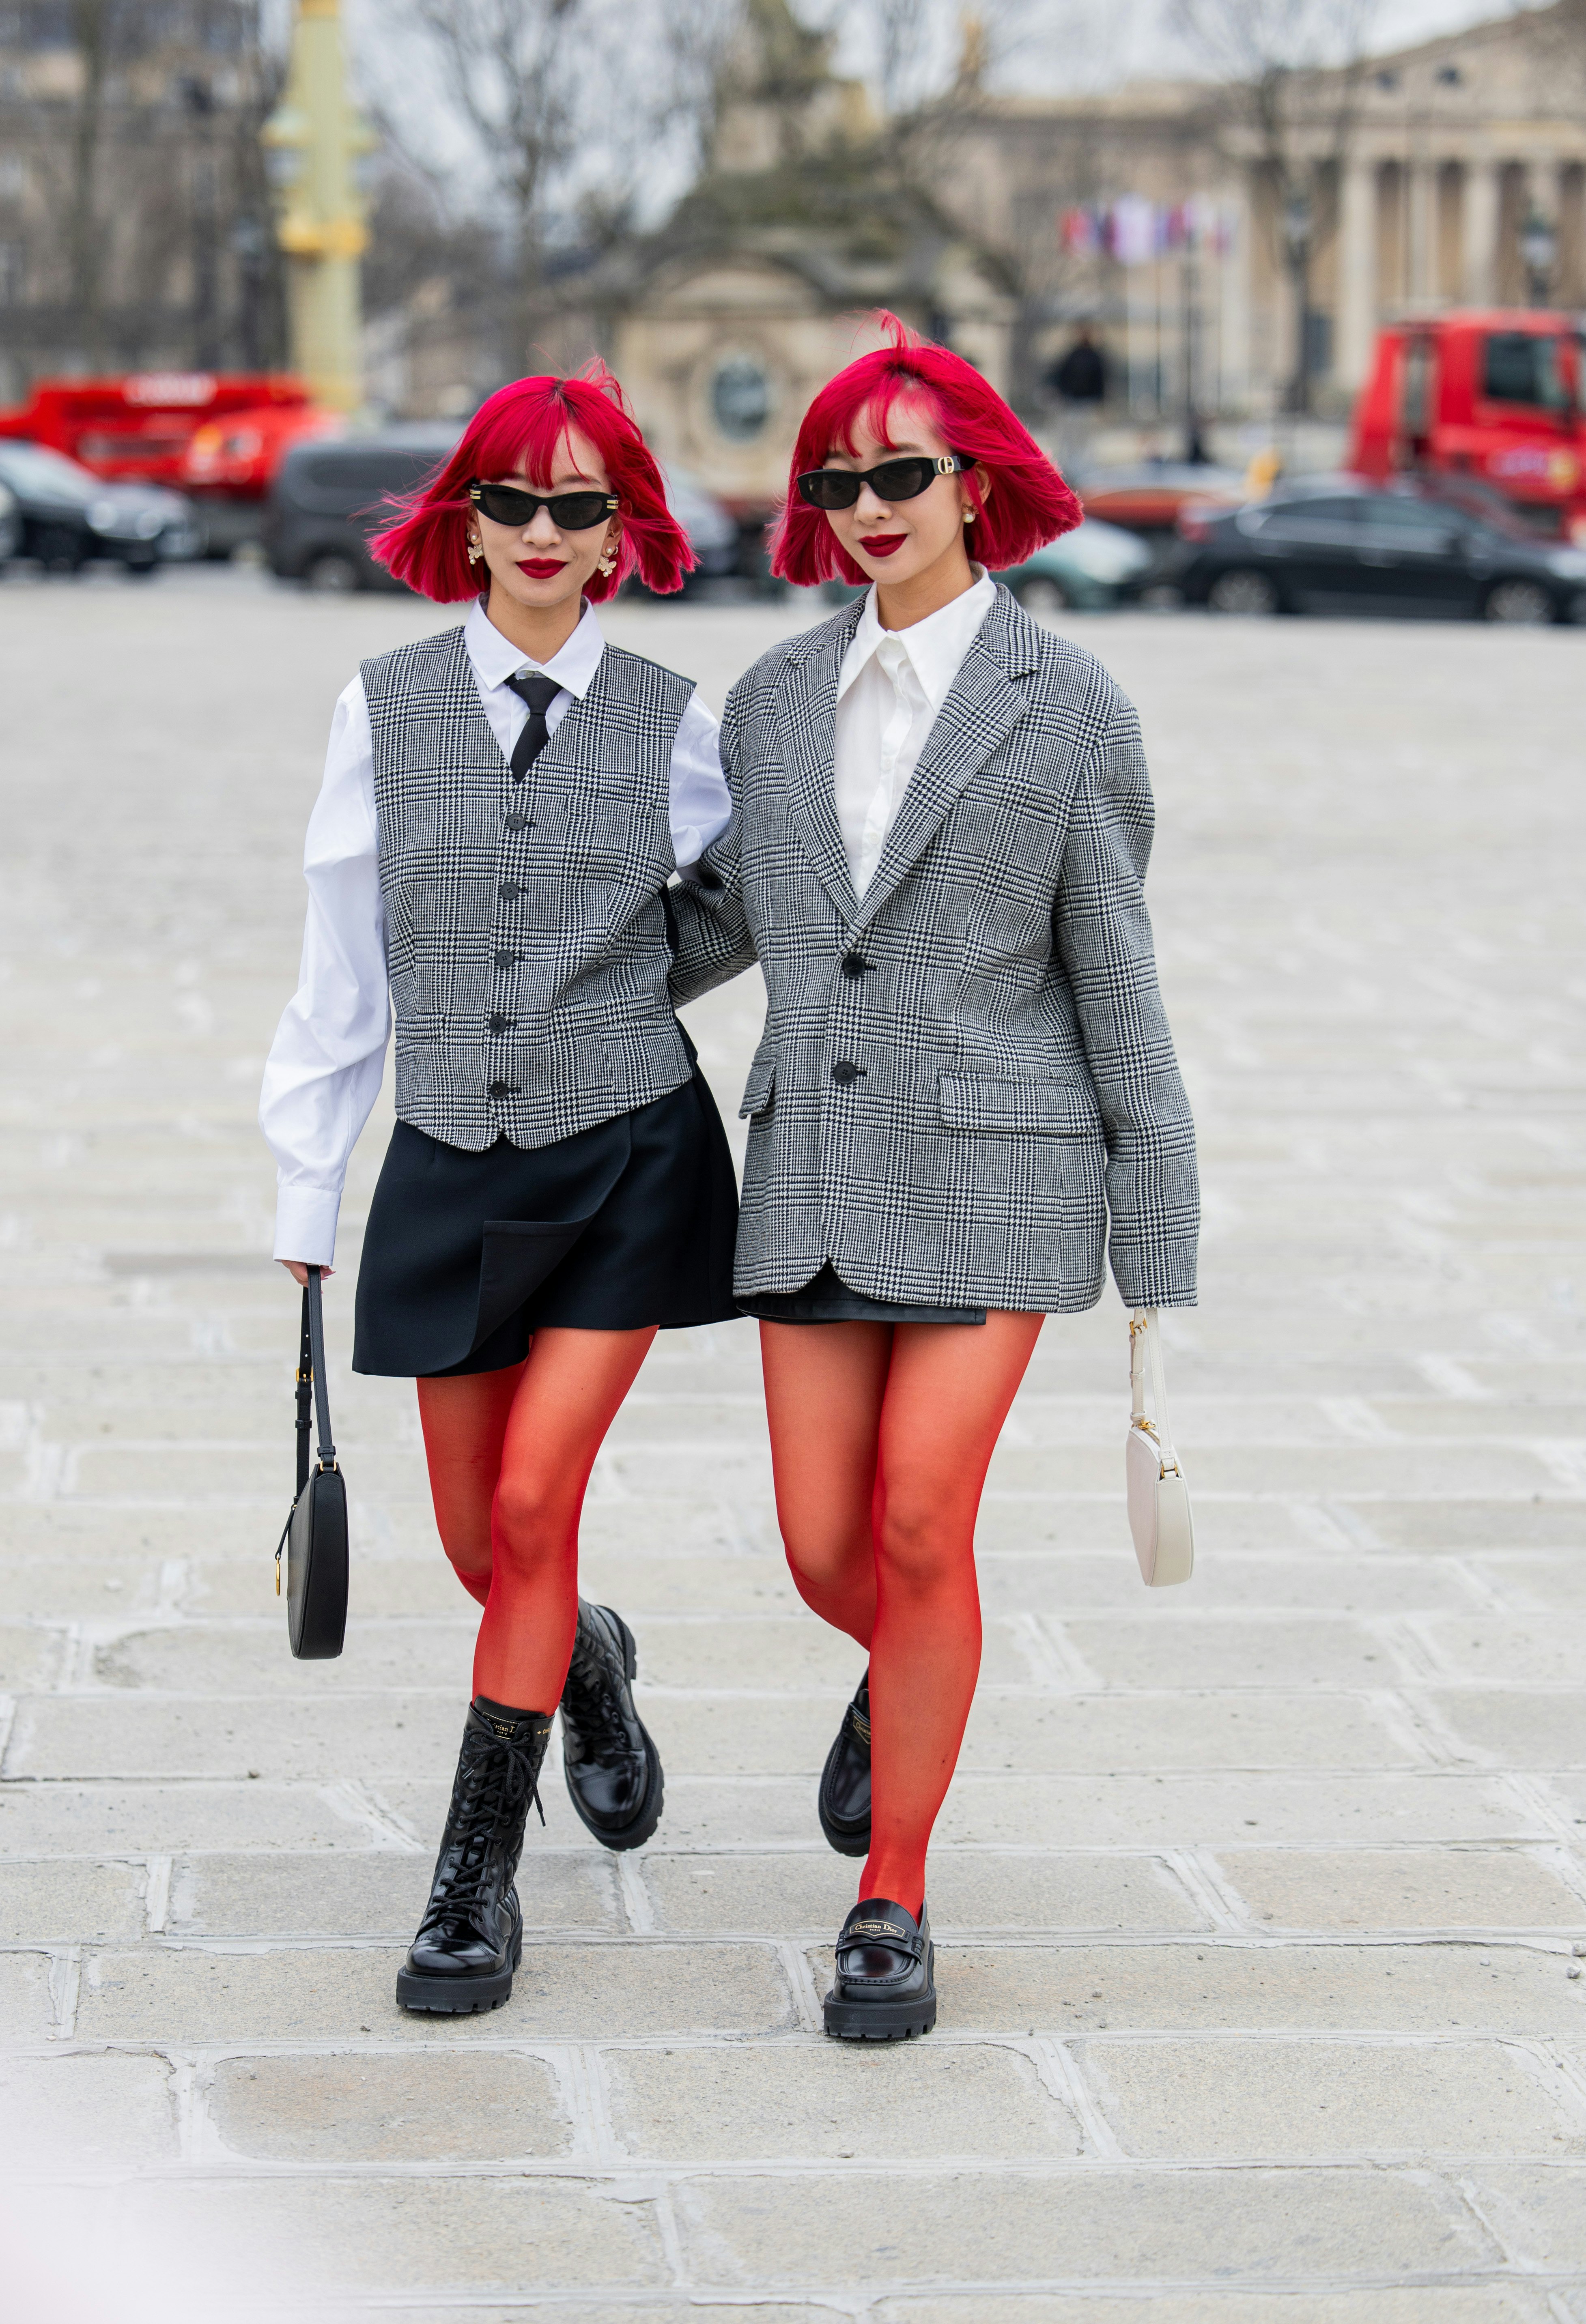 Spring Leg Style: Best Coloured Tights - UK Tights Blog